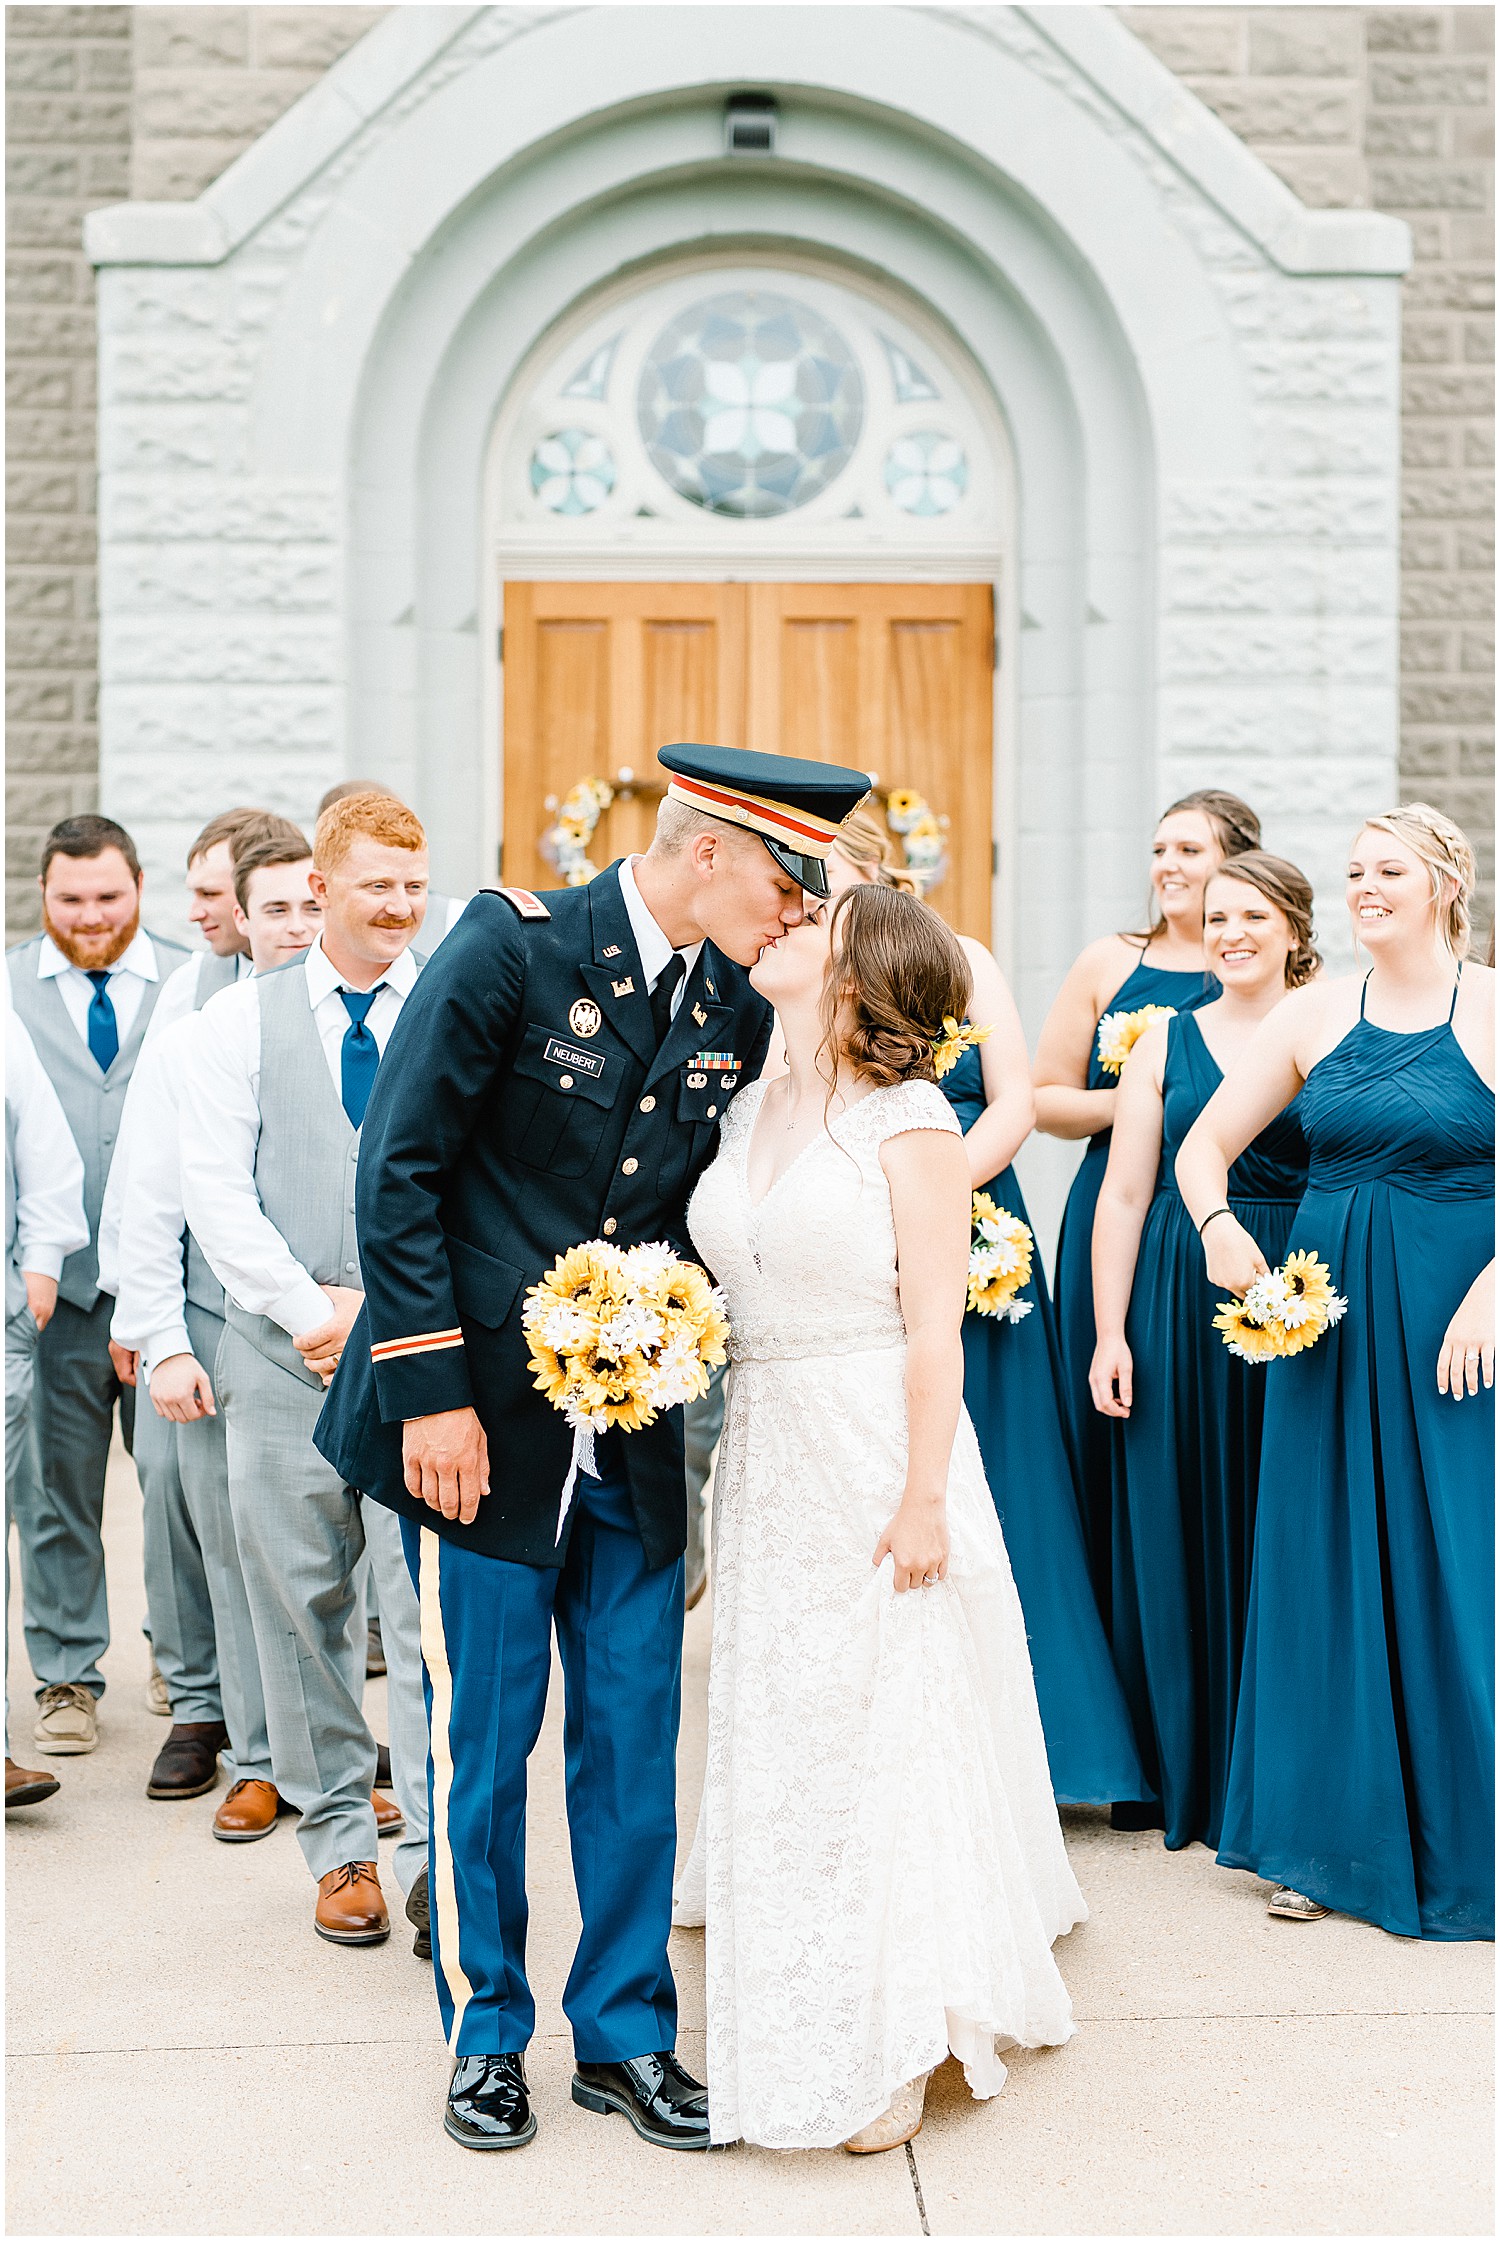 bride and groom kiss outside church with wedding party in the background in gray suits and long navy dresses